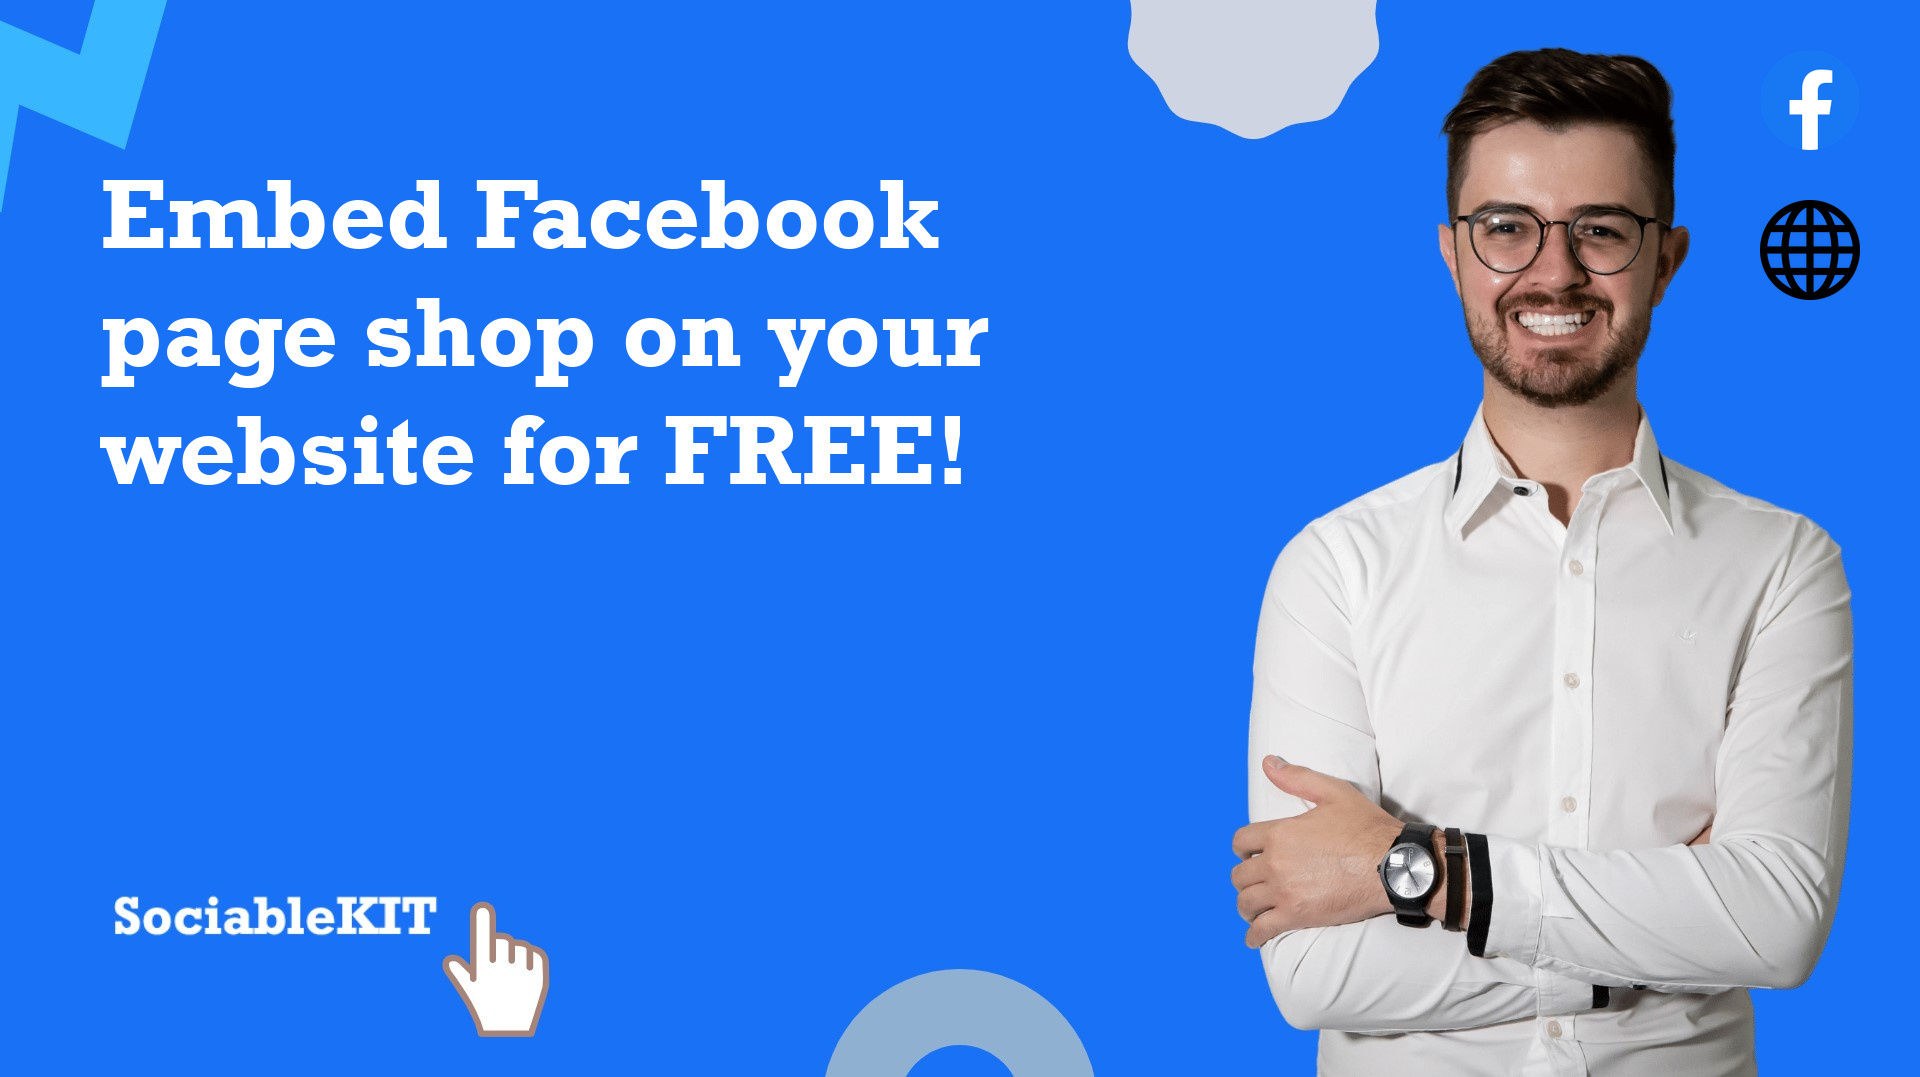 https://www.sociablekit.com/tutorials/resources/thumbnails/how_to_embed_facebook_page_shop_on_your_website_for_free.jpg